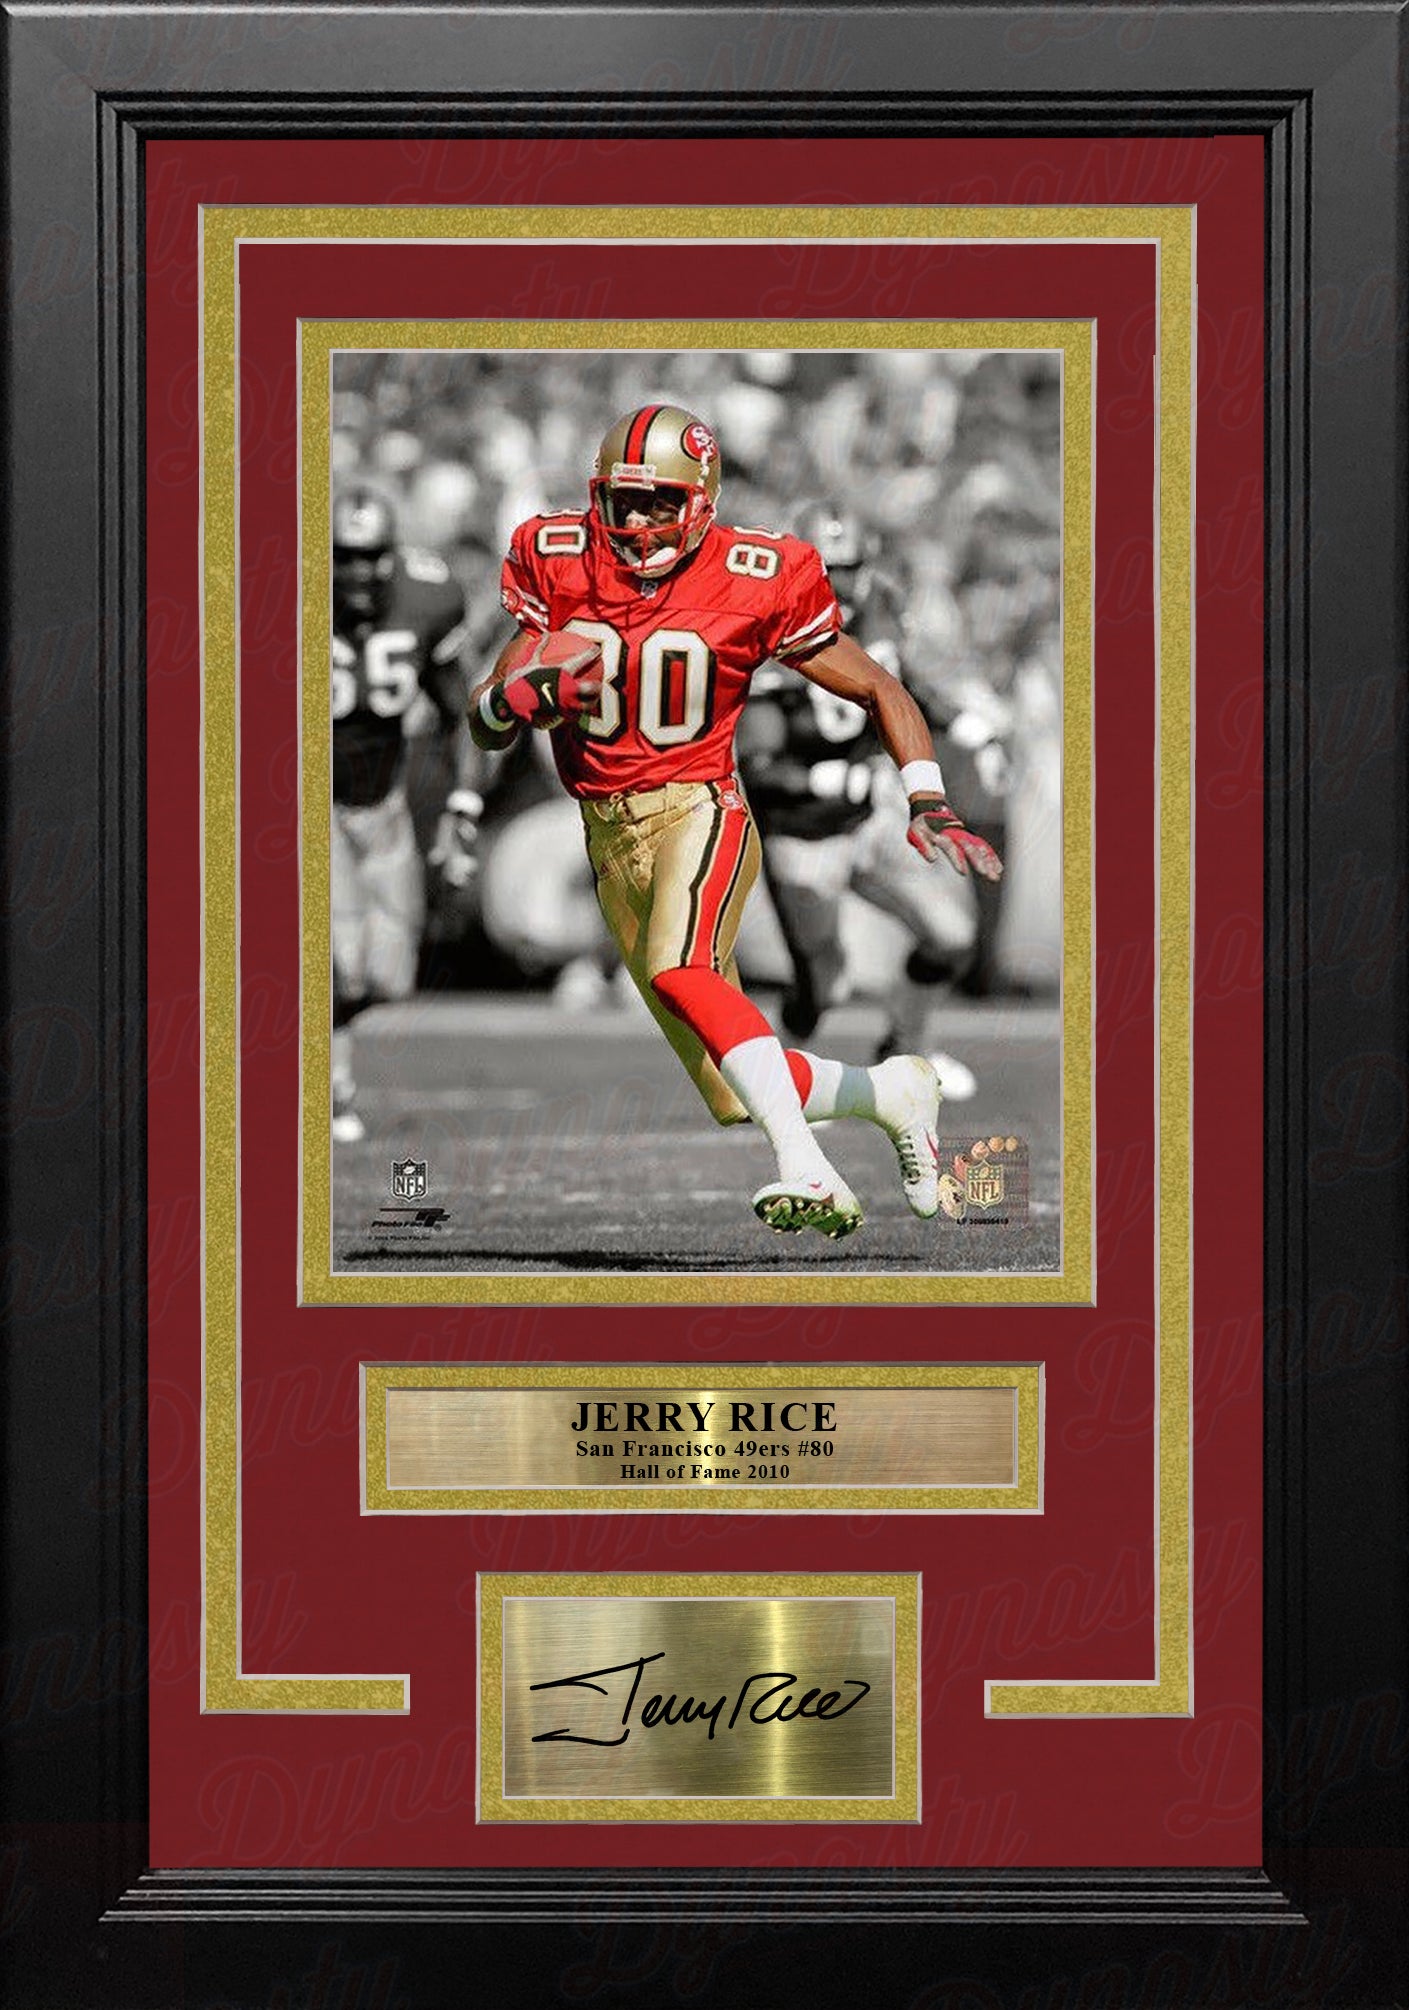 Jerry Rice San Francisco 49ers 8' x 10' Framed Football Spotlight Photo  with Engraved Autograph